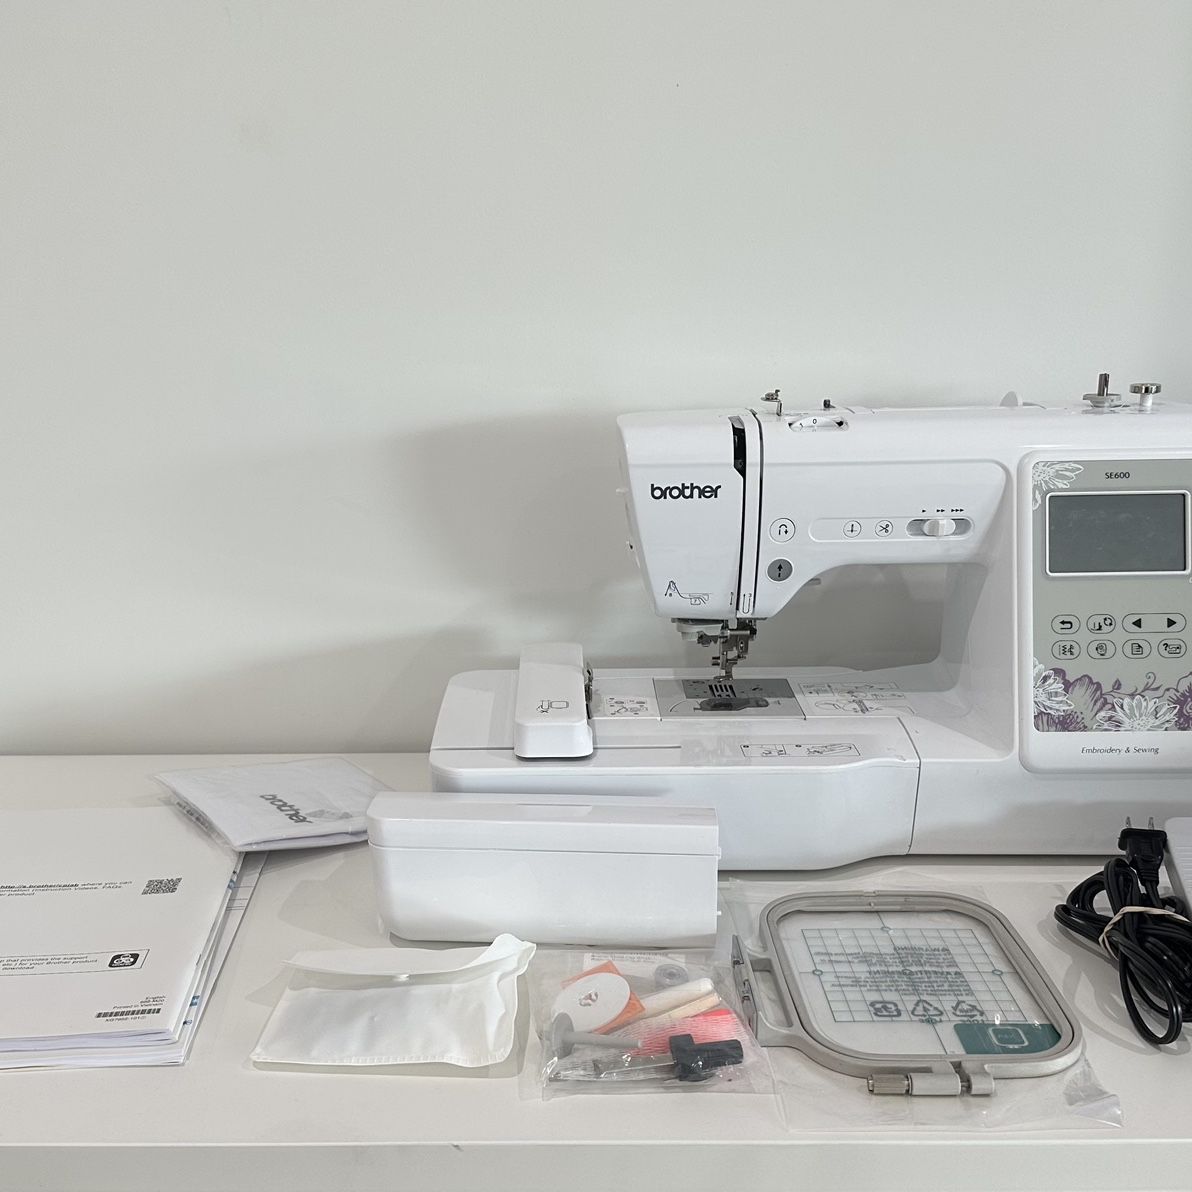 BROTHER SE600 Embroidery-Seeing Machine Combo for Sale in Dallas